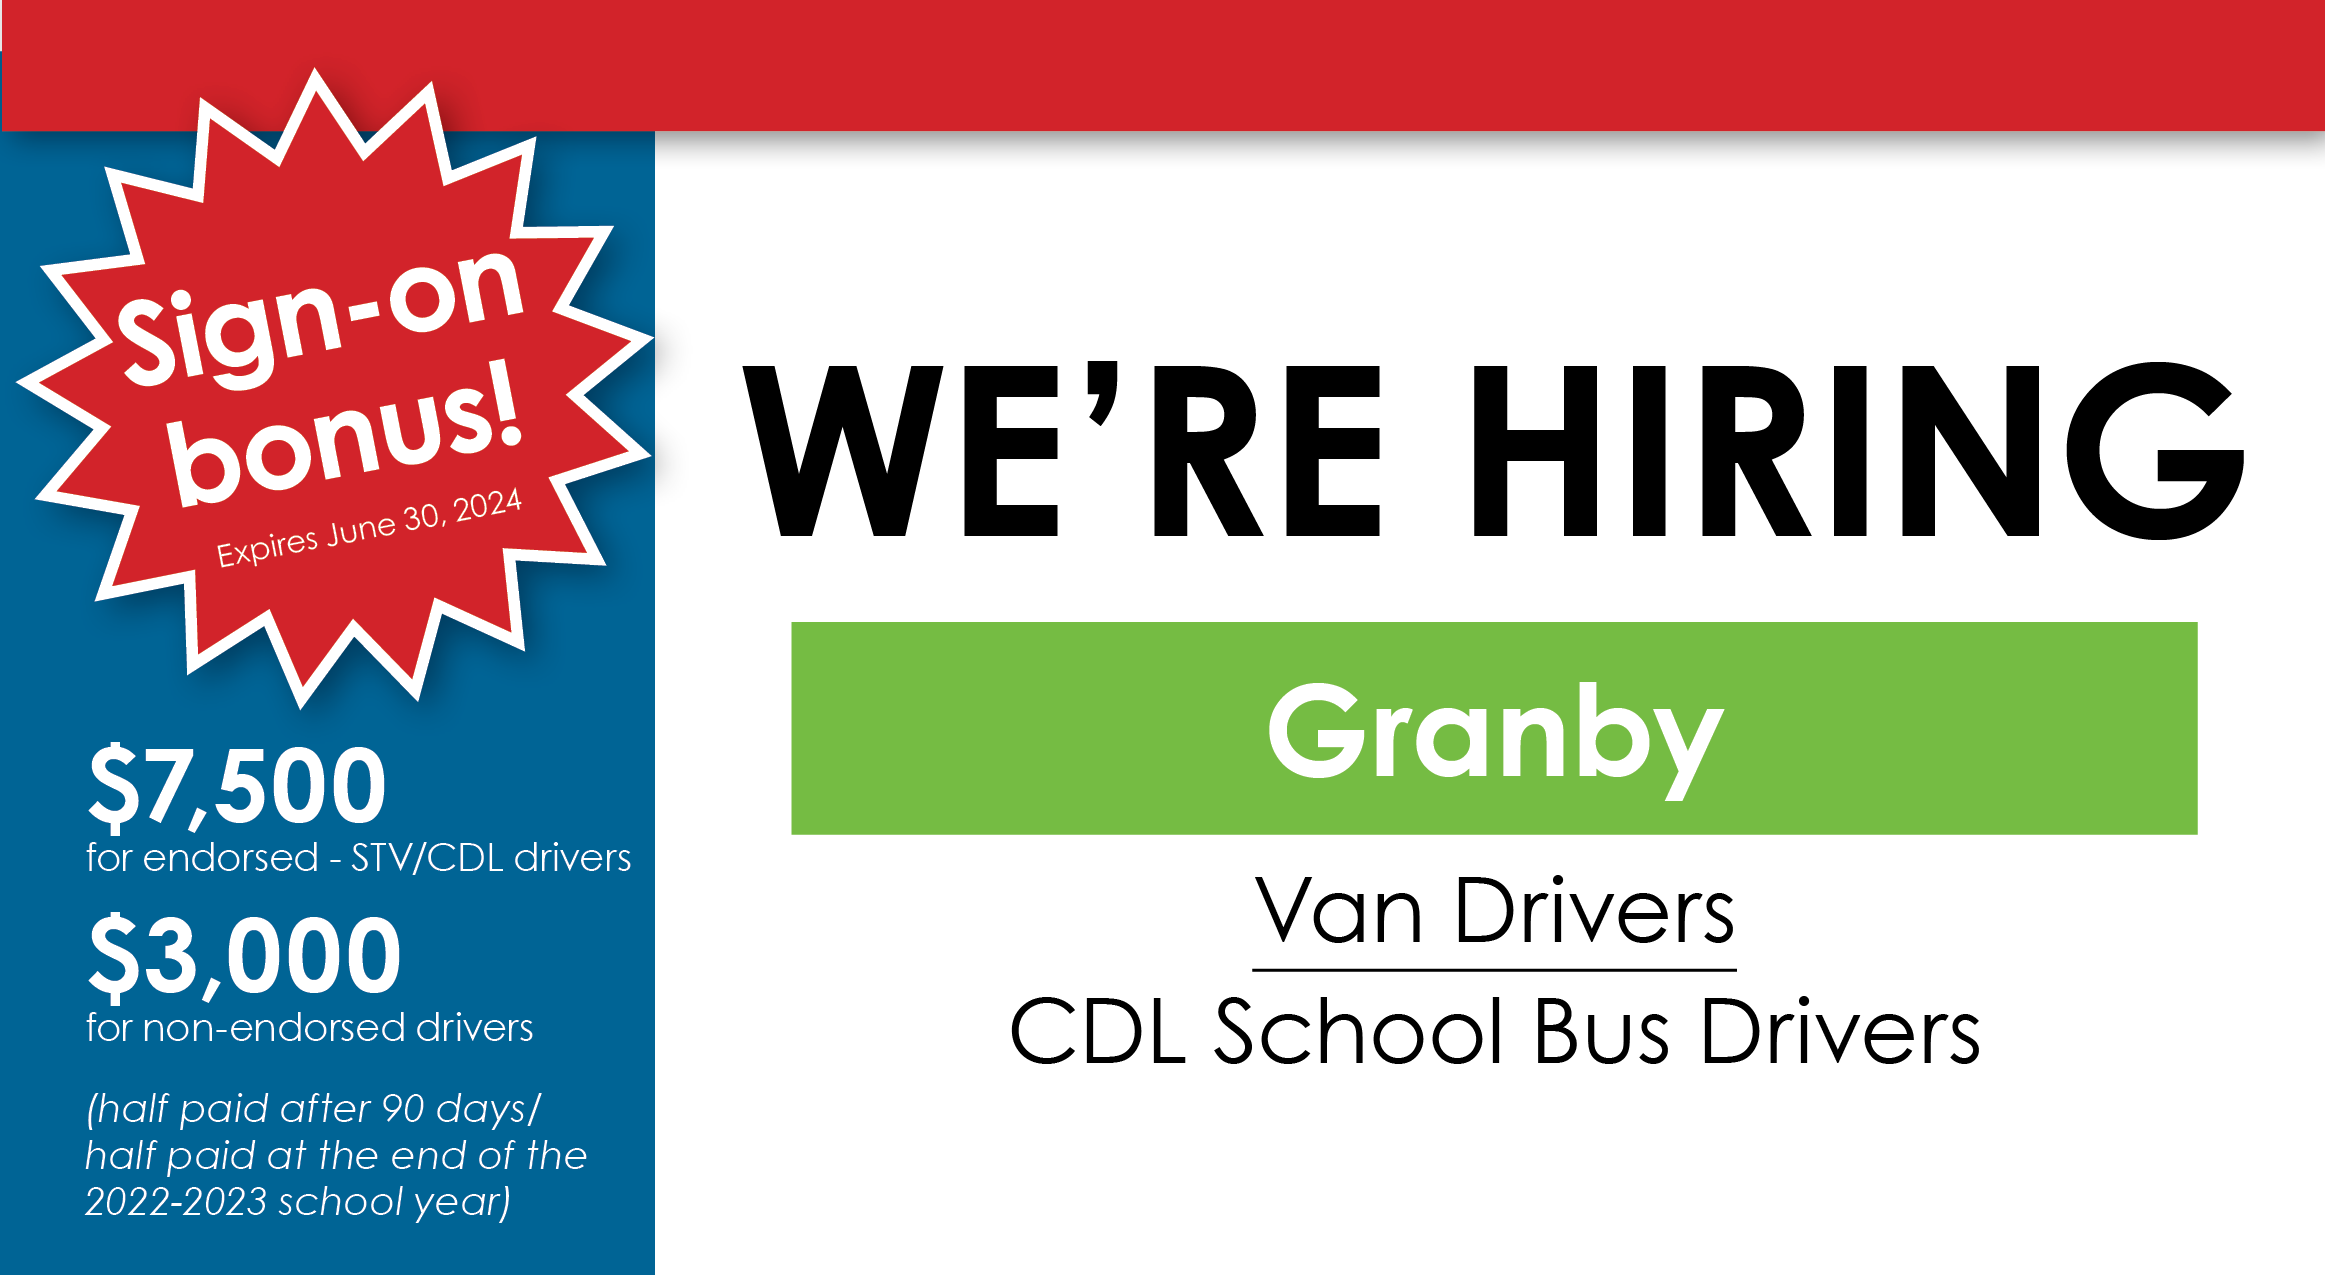 CREC is looking for Van Drivers in Granby and Hartford and CDL School Bus Drivers in Granby. There is a $7500 sign-on bonus for endorsed STV/CDL Drivers, and a $3000 bonus for non-endorsed drivers; half-paid after 90 days, half-paid at the end of the school year.